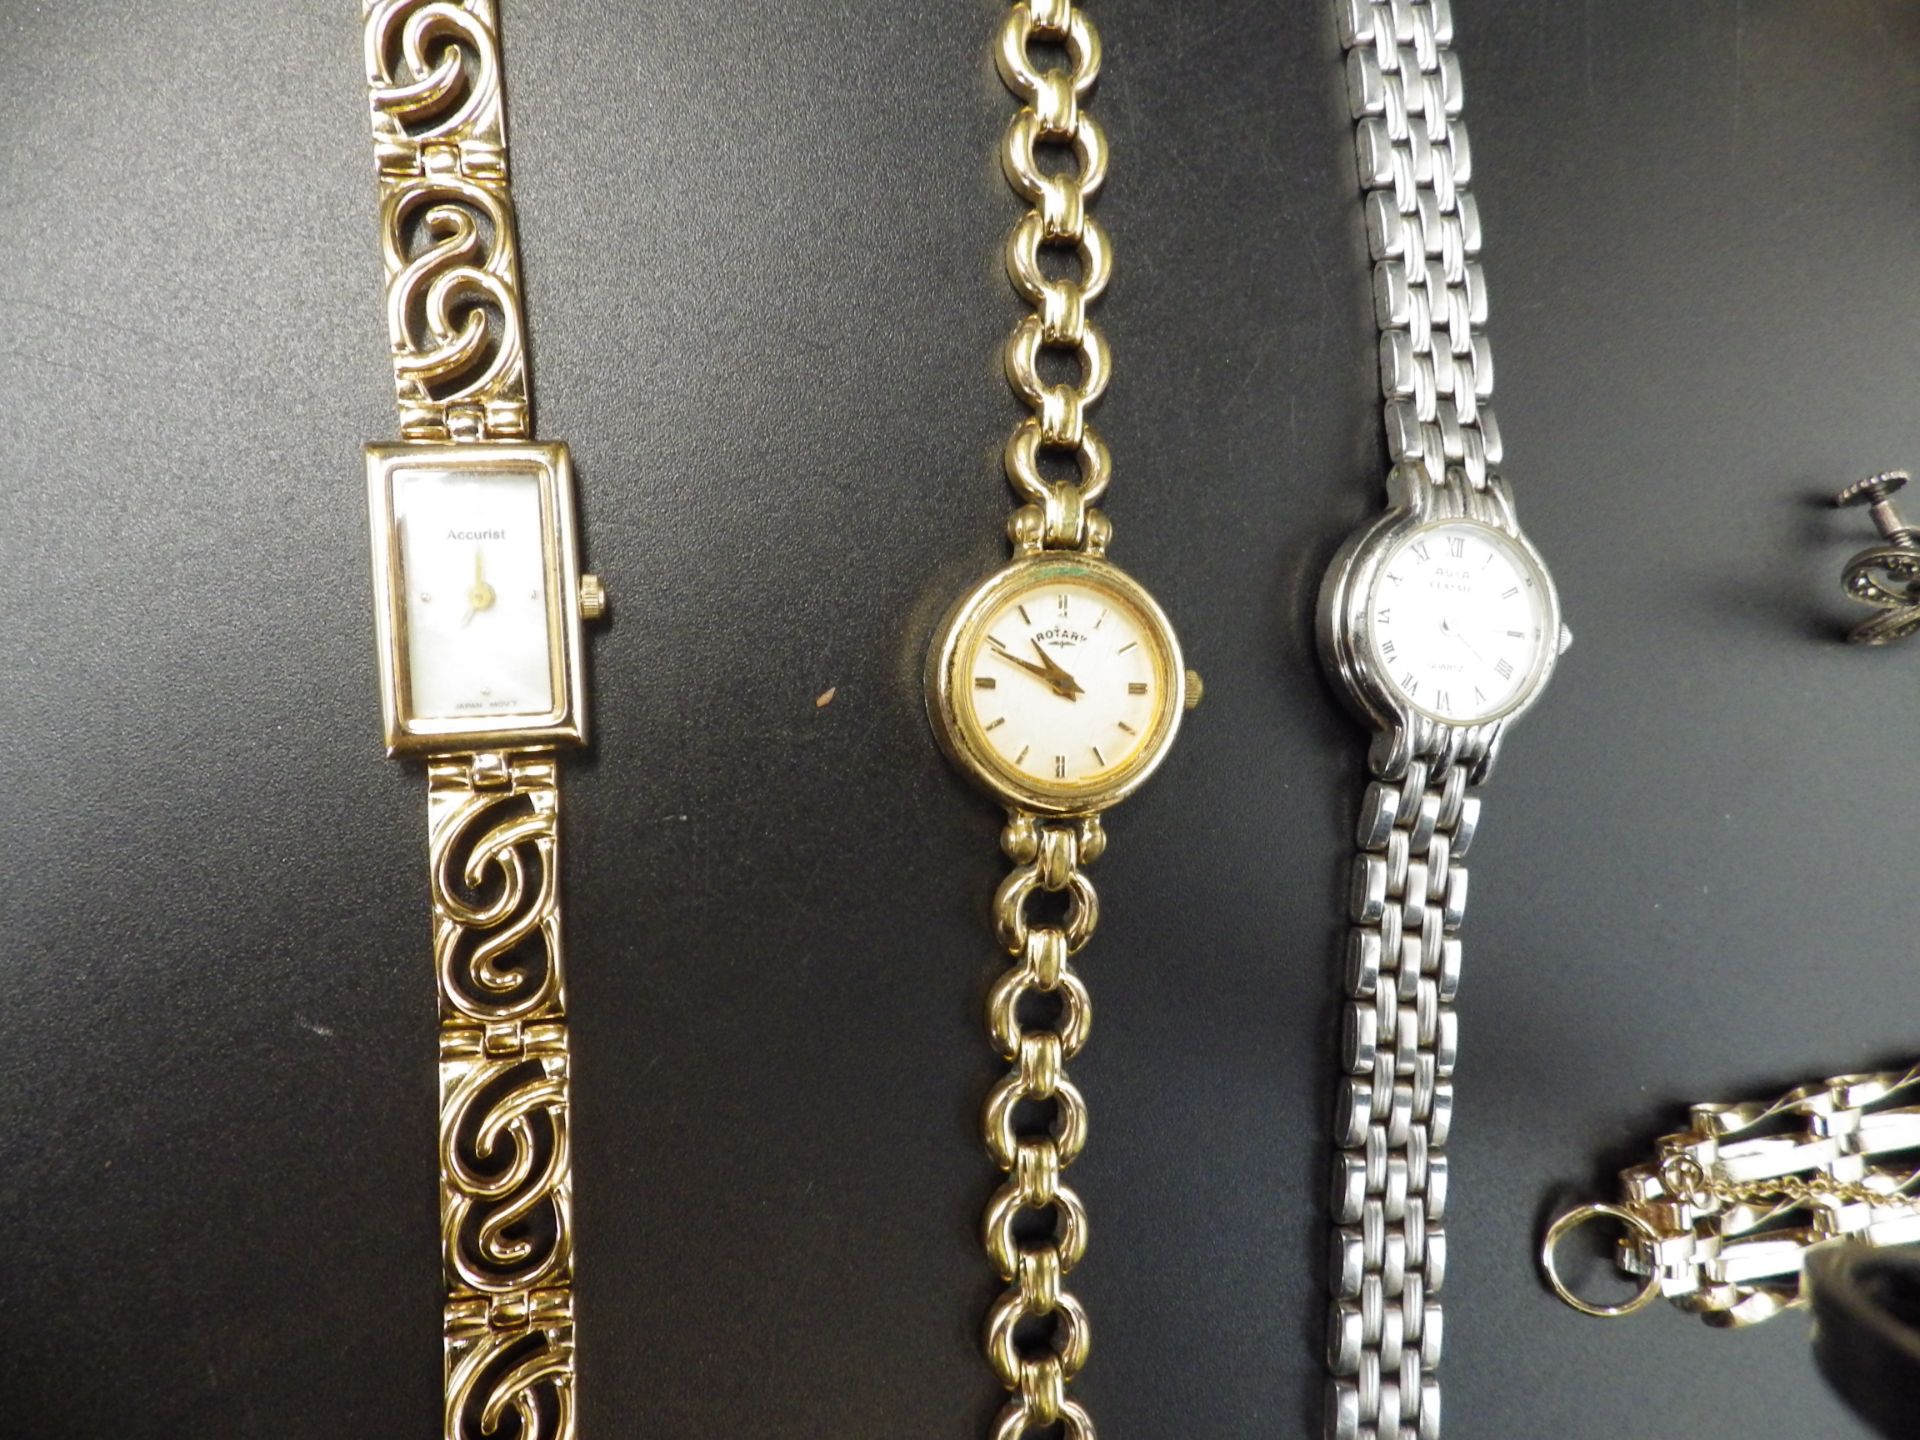 Costume jewellery lot to include 3 ladies watches - Accurist, Rotary and Avia, a bracelet, marcasite - Image 2 of 5